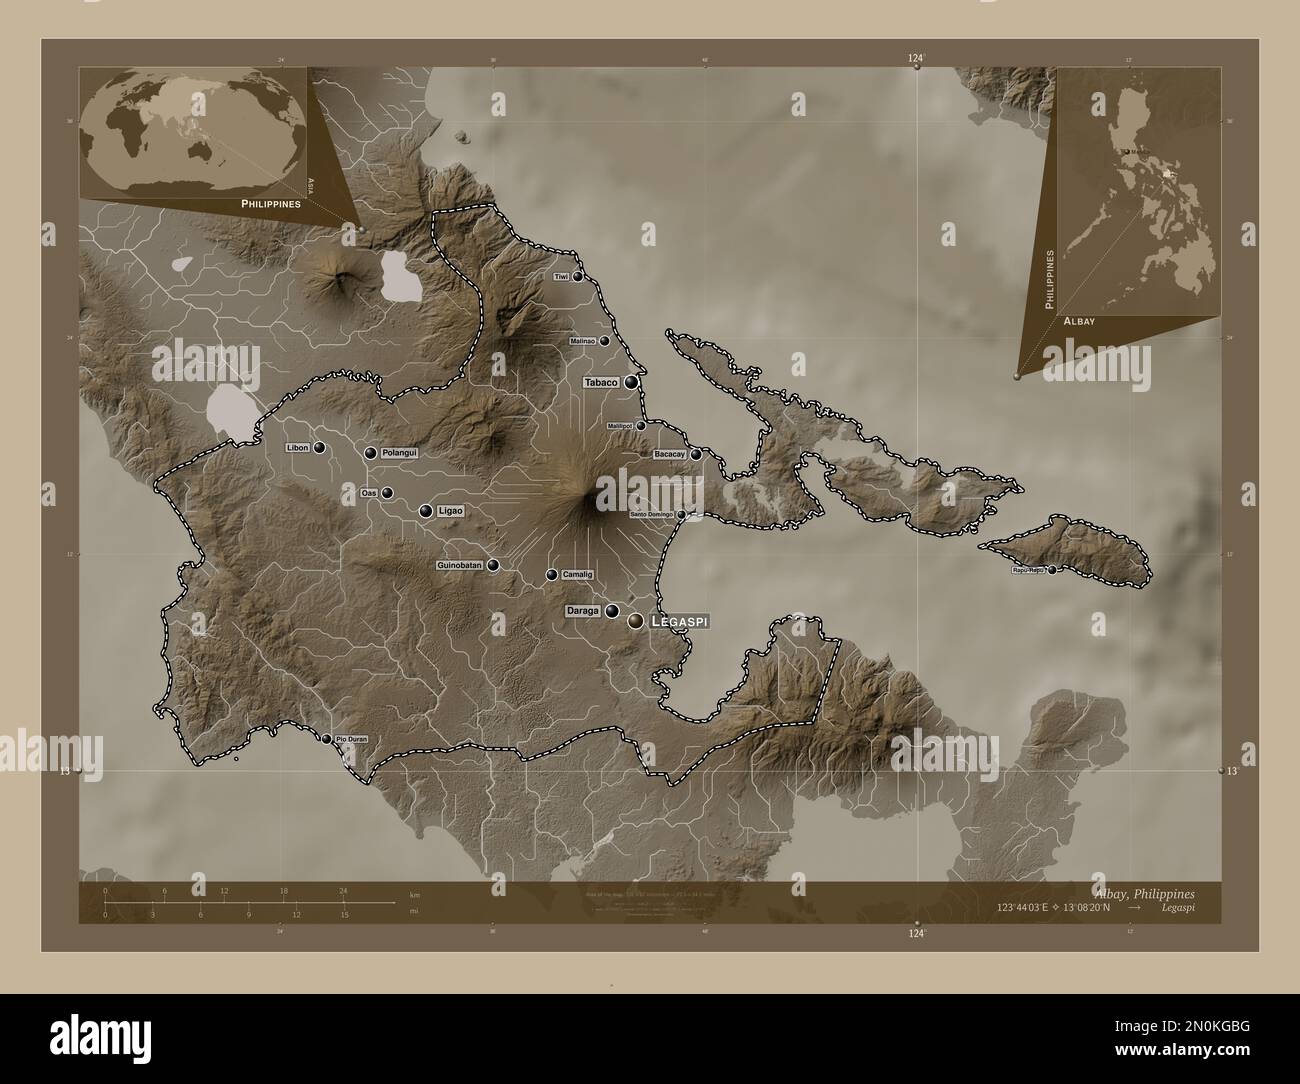 Albay, province of Philippines. Elevation map colored in sepia tones with lakes and rivers. Locations and names of major cities of the region. Corner Stock Photo